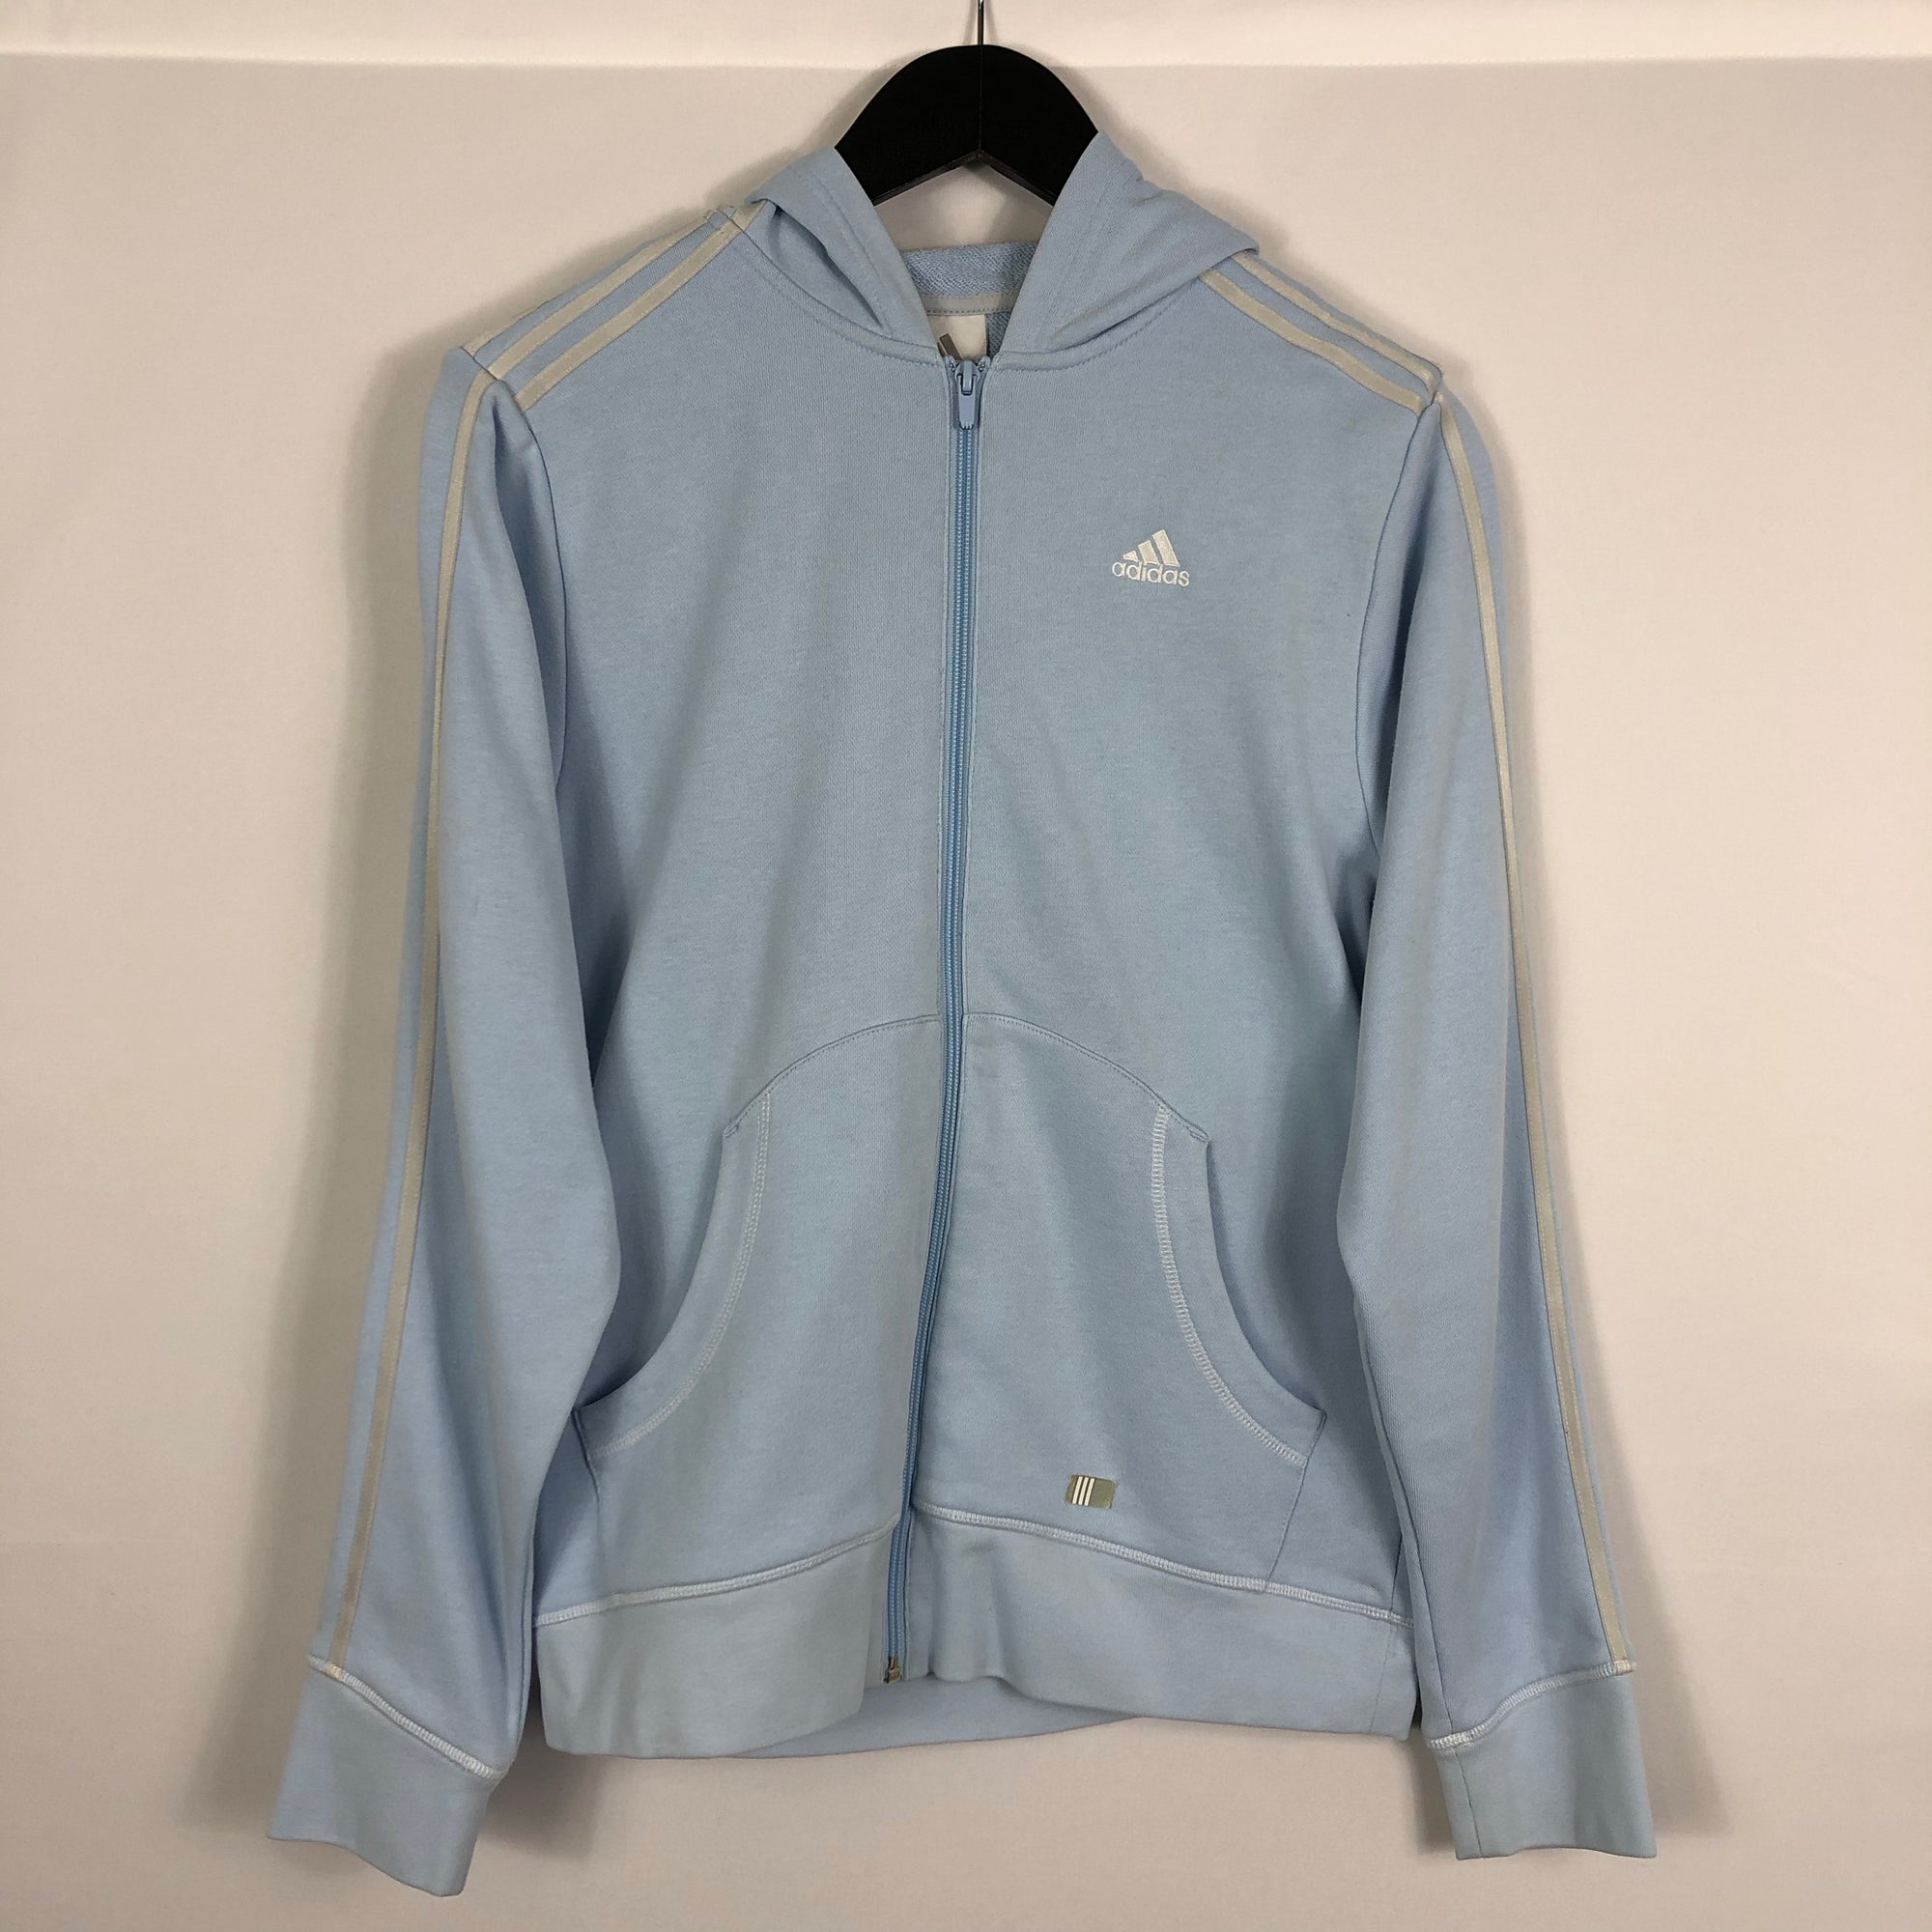 Adidas Zip Up Hoodie in Baby Blue - Small